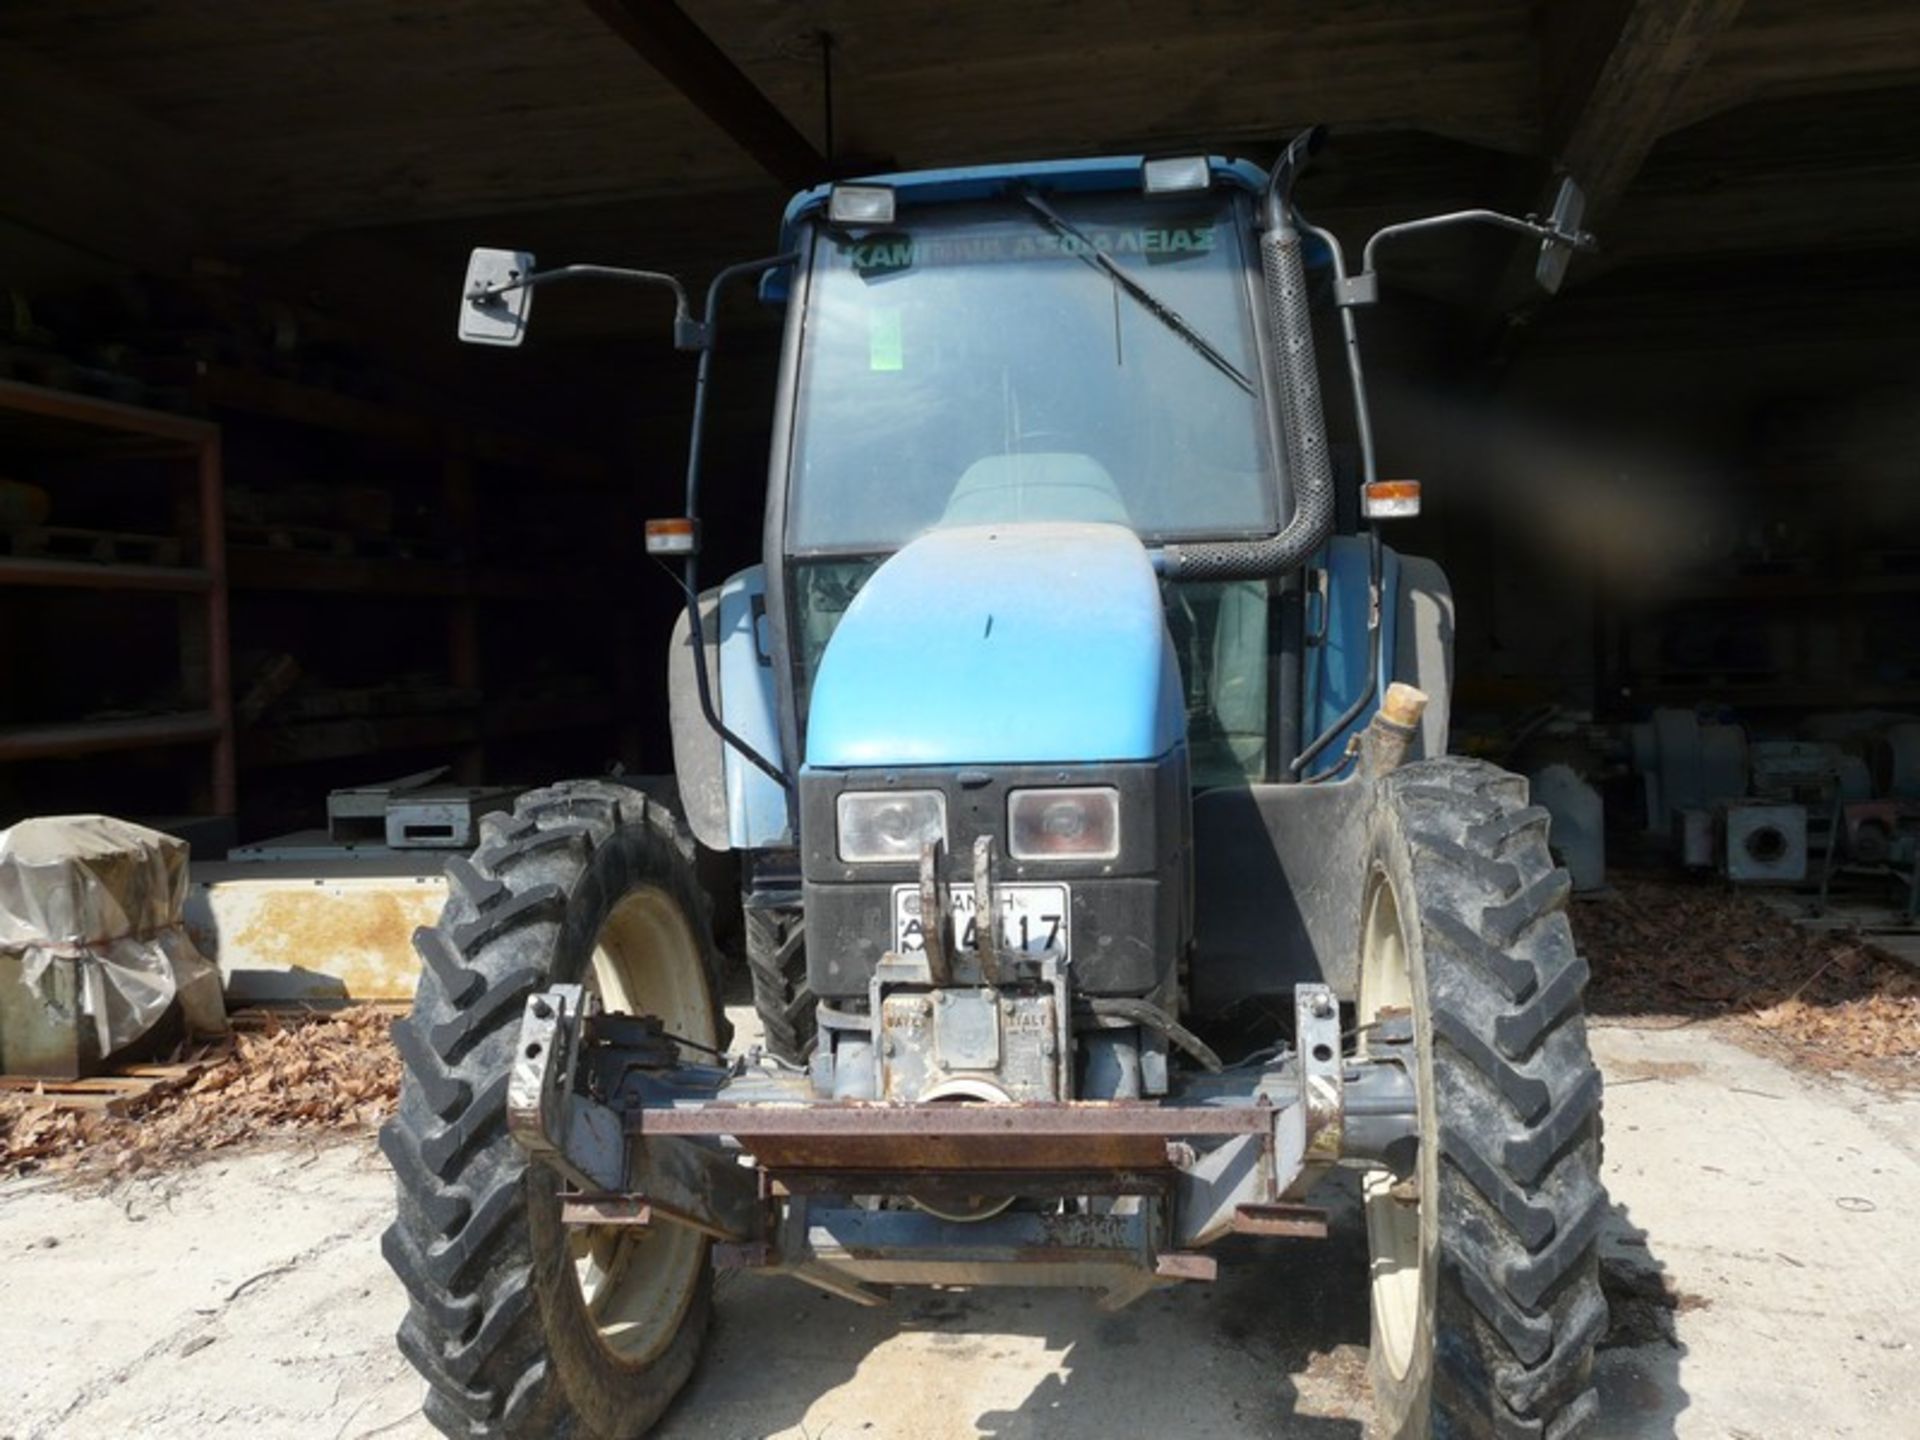 TRACTOR NEW HOLLAND TL 90,REG AM54177,WORKING CONDITION, HRS 4001,HYDROLIC SYSTEM,MISSING BATTERY (